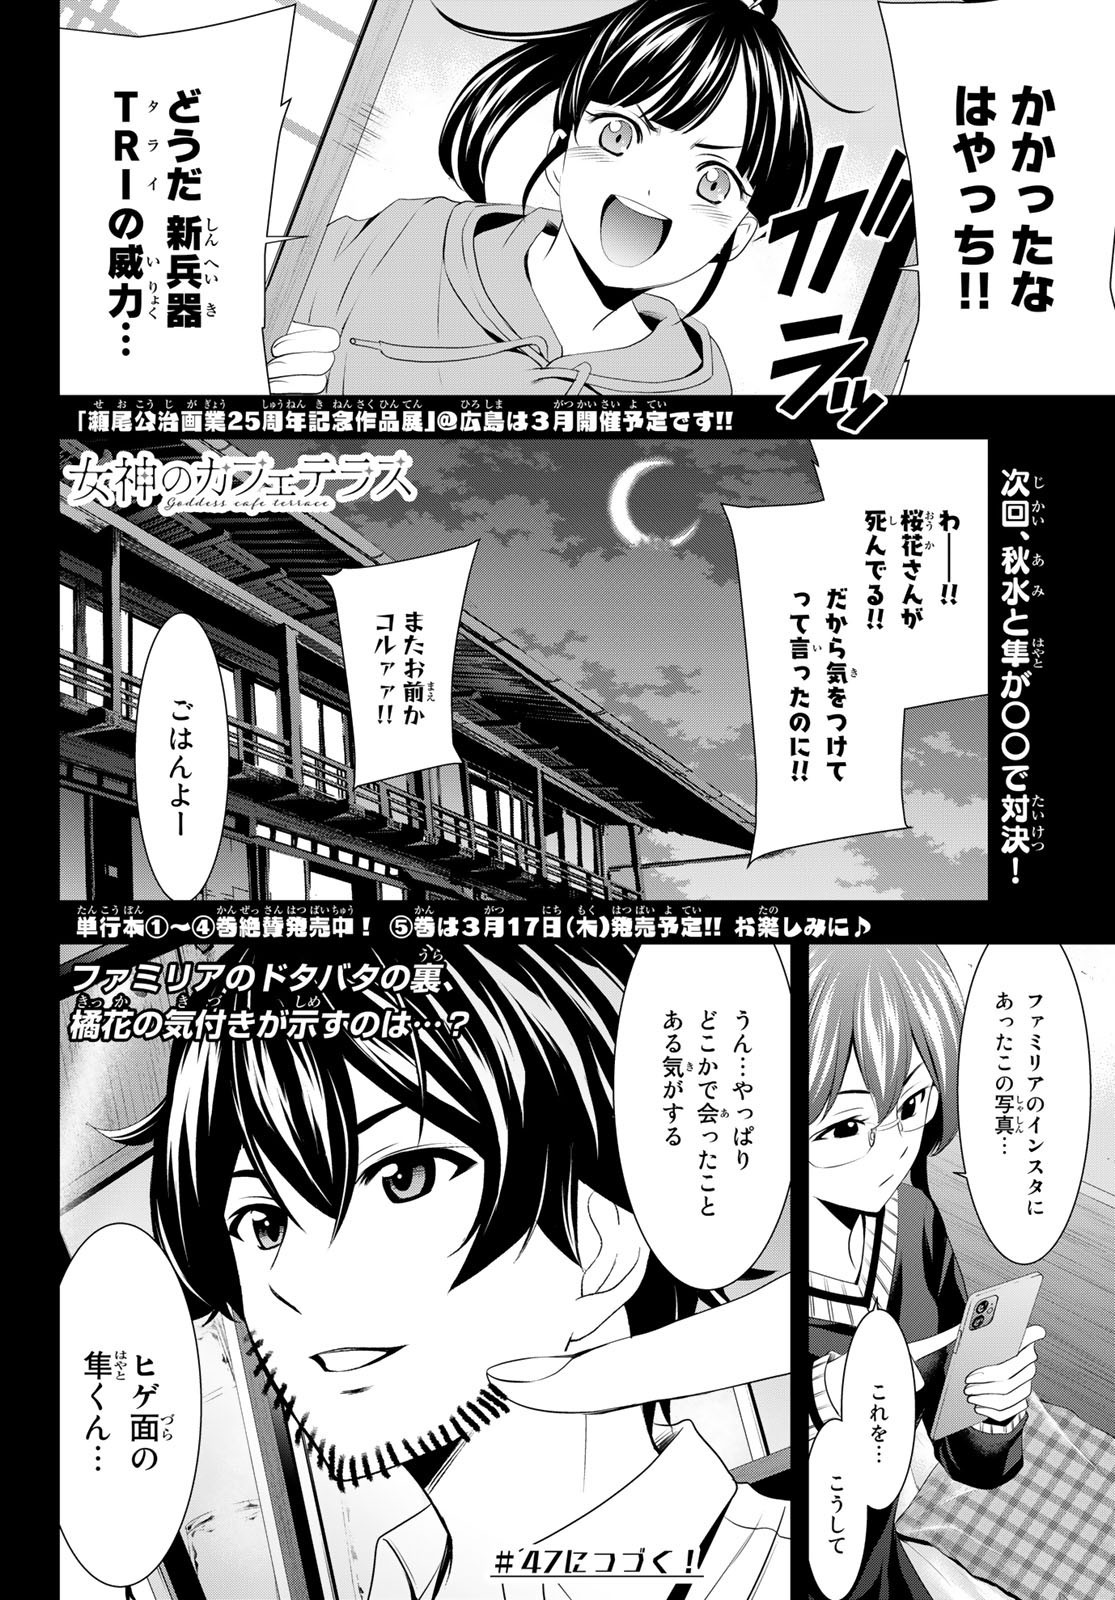 Goddess-Cafe-Terrace - Chapter 046 - Page 18